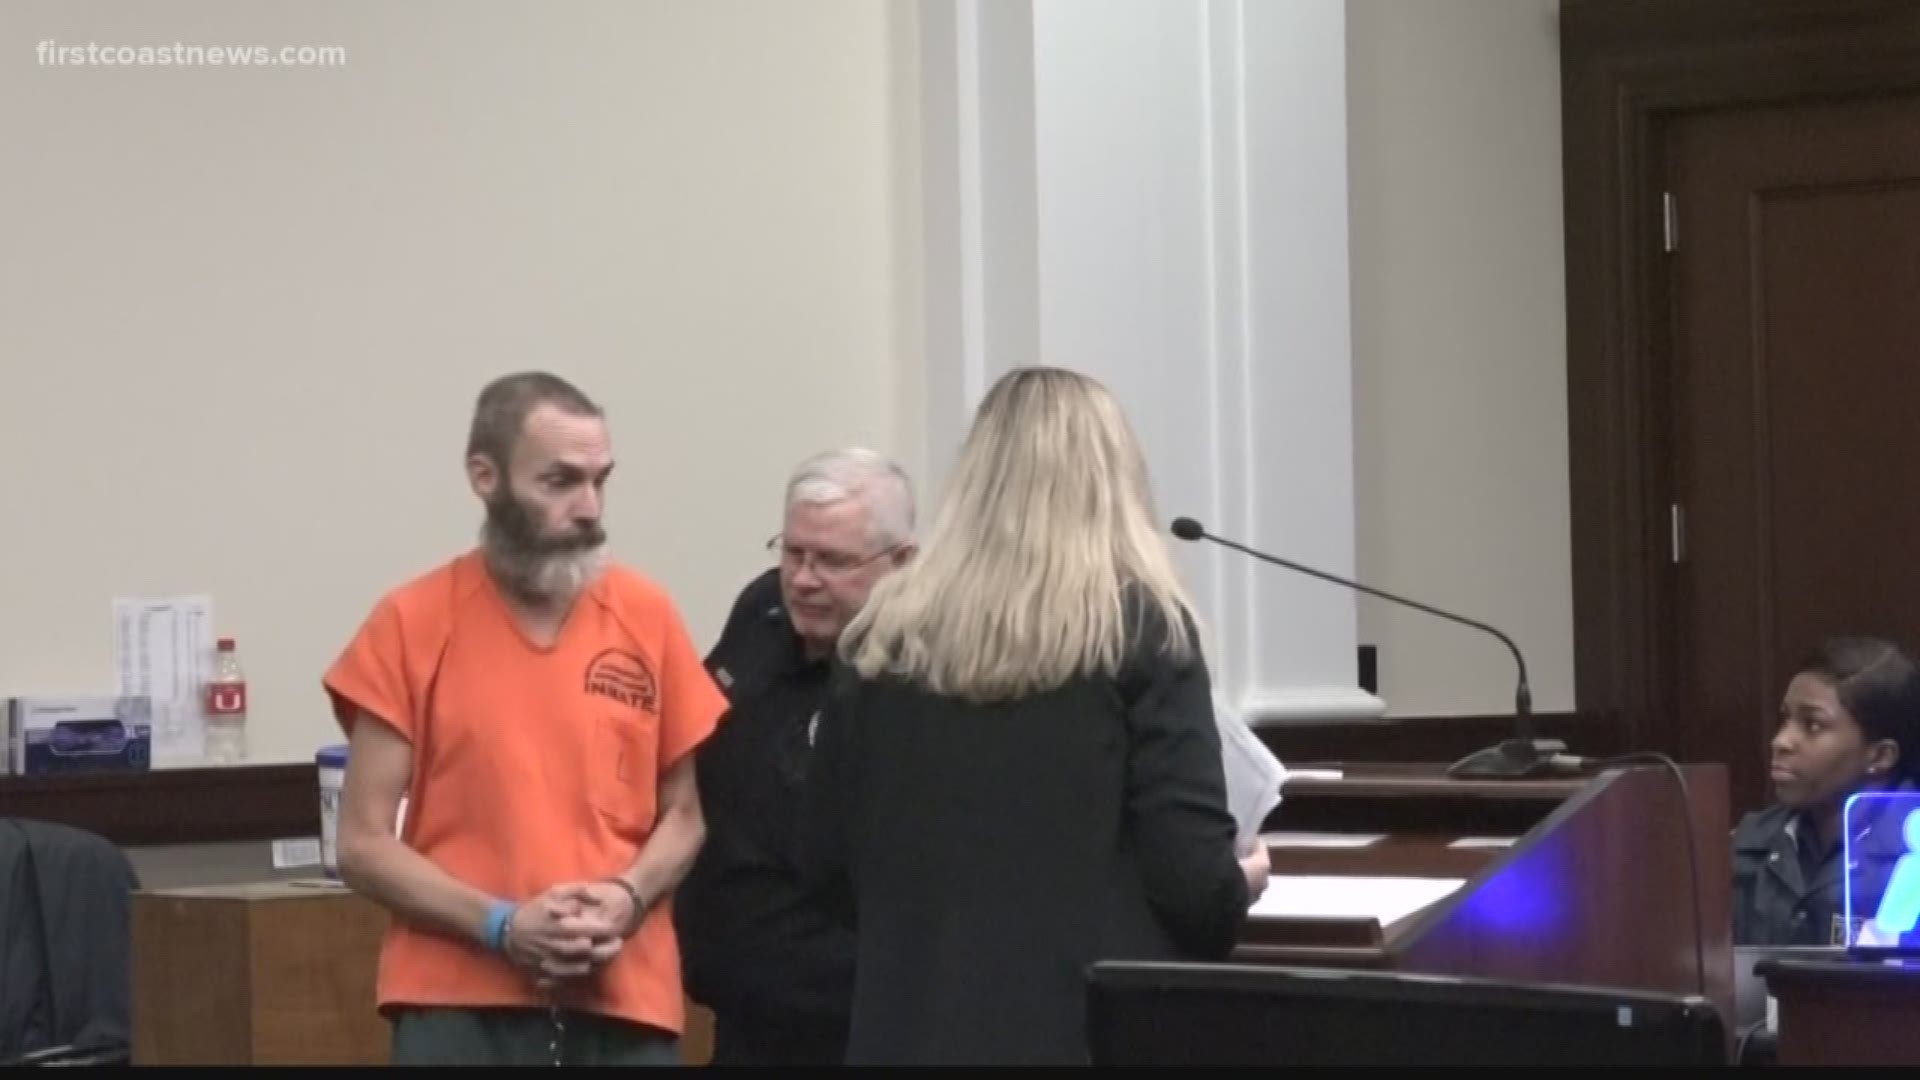 David Beckley waived his rights to a speedy trial Wednesday. He is accused of breaking into the Flame Broiler in San Marco and setting in on fire.